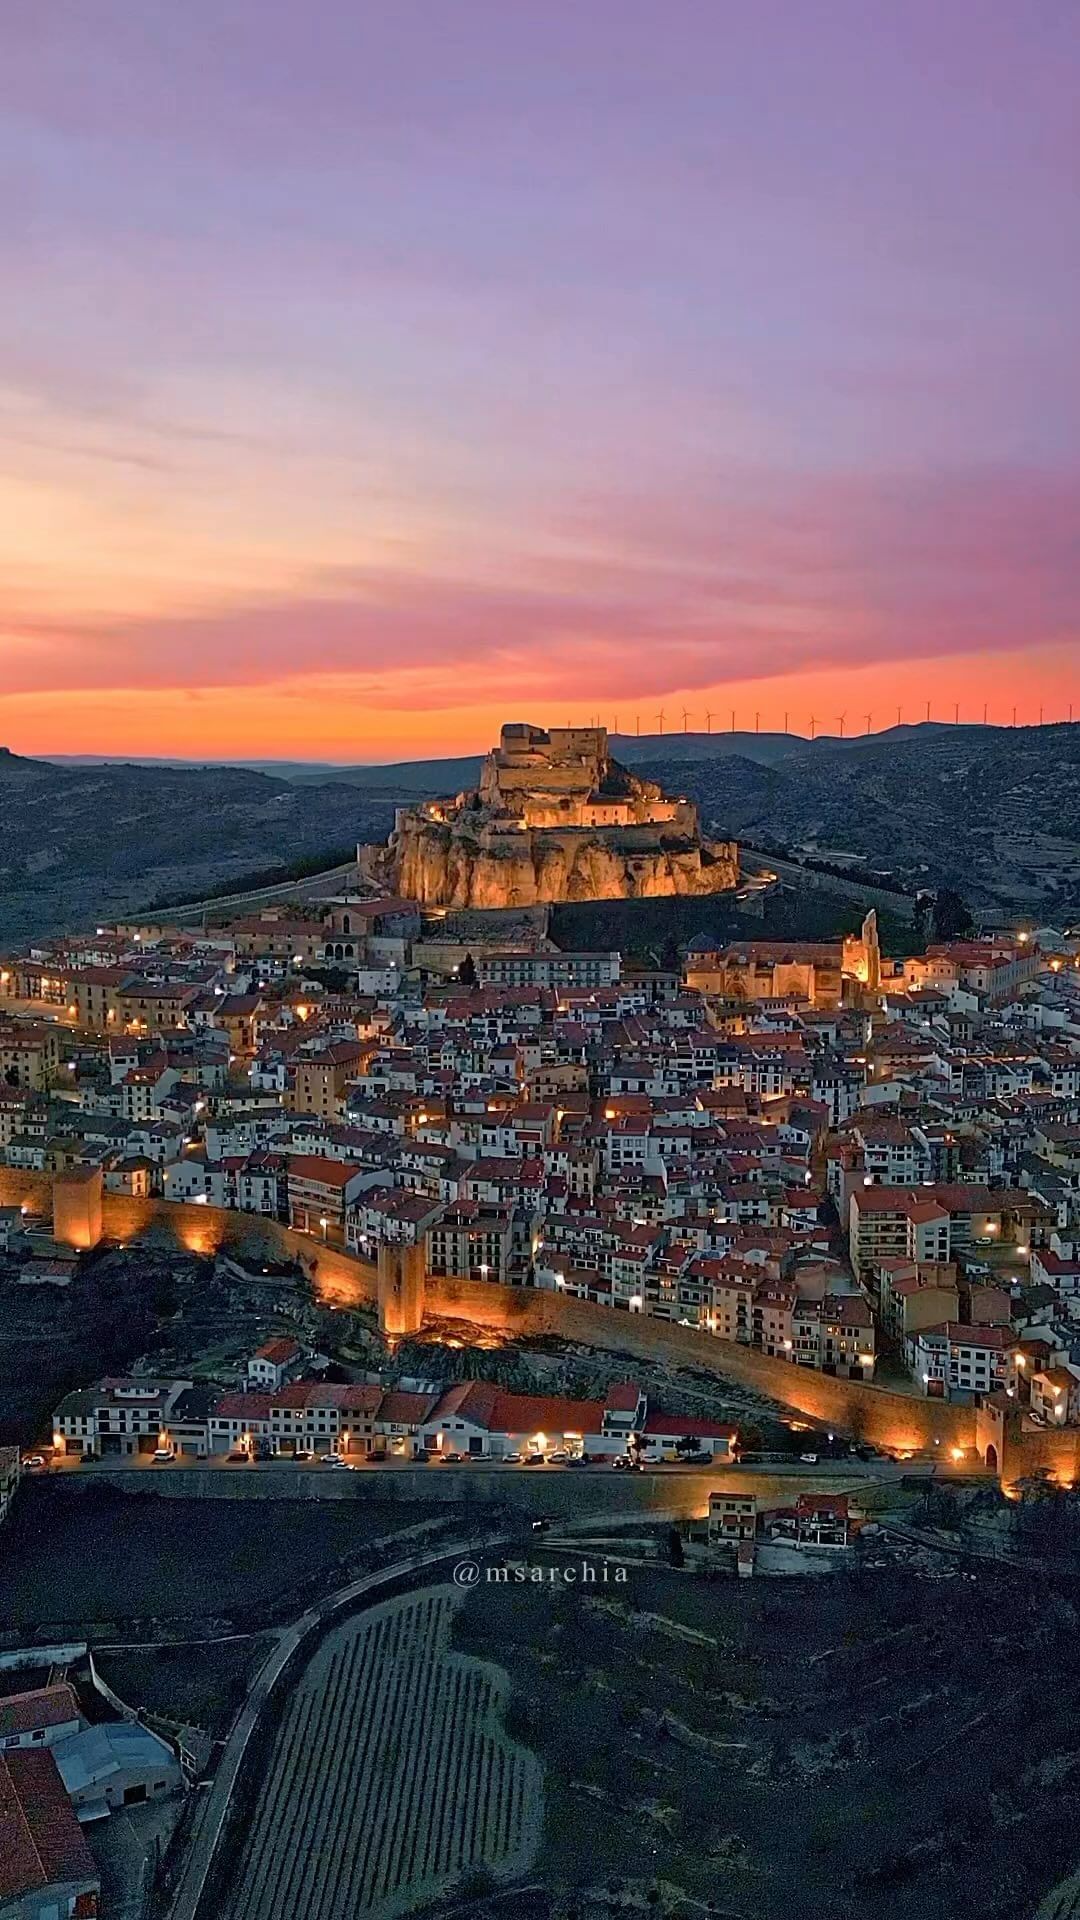 Riverside Adventure in Morella and Surrounding Villages